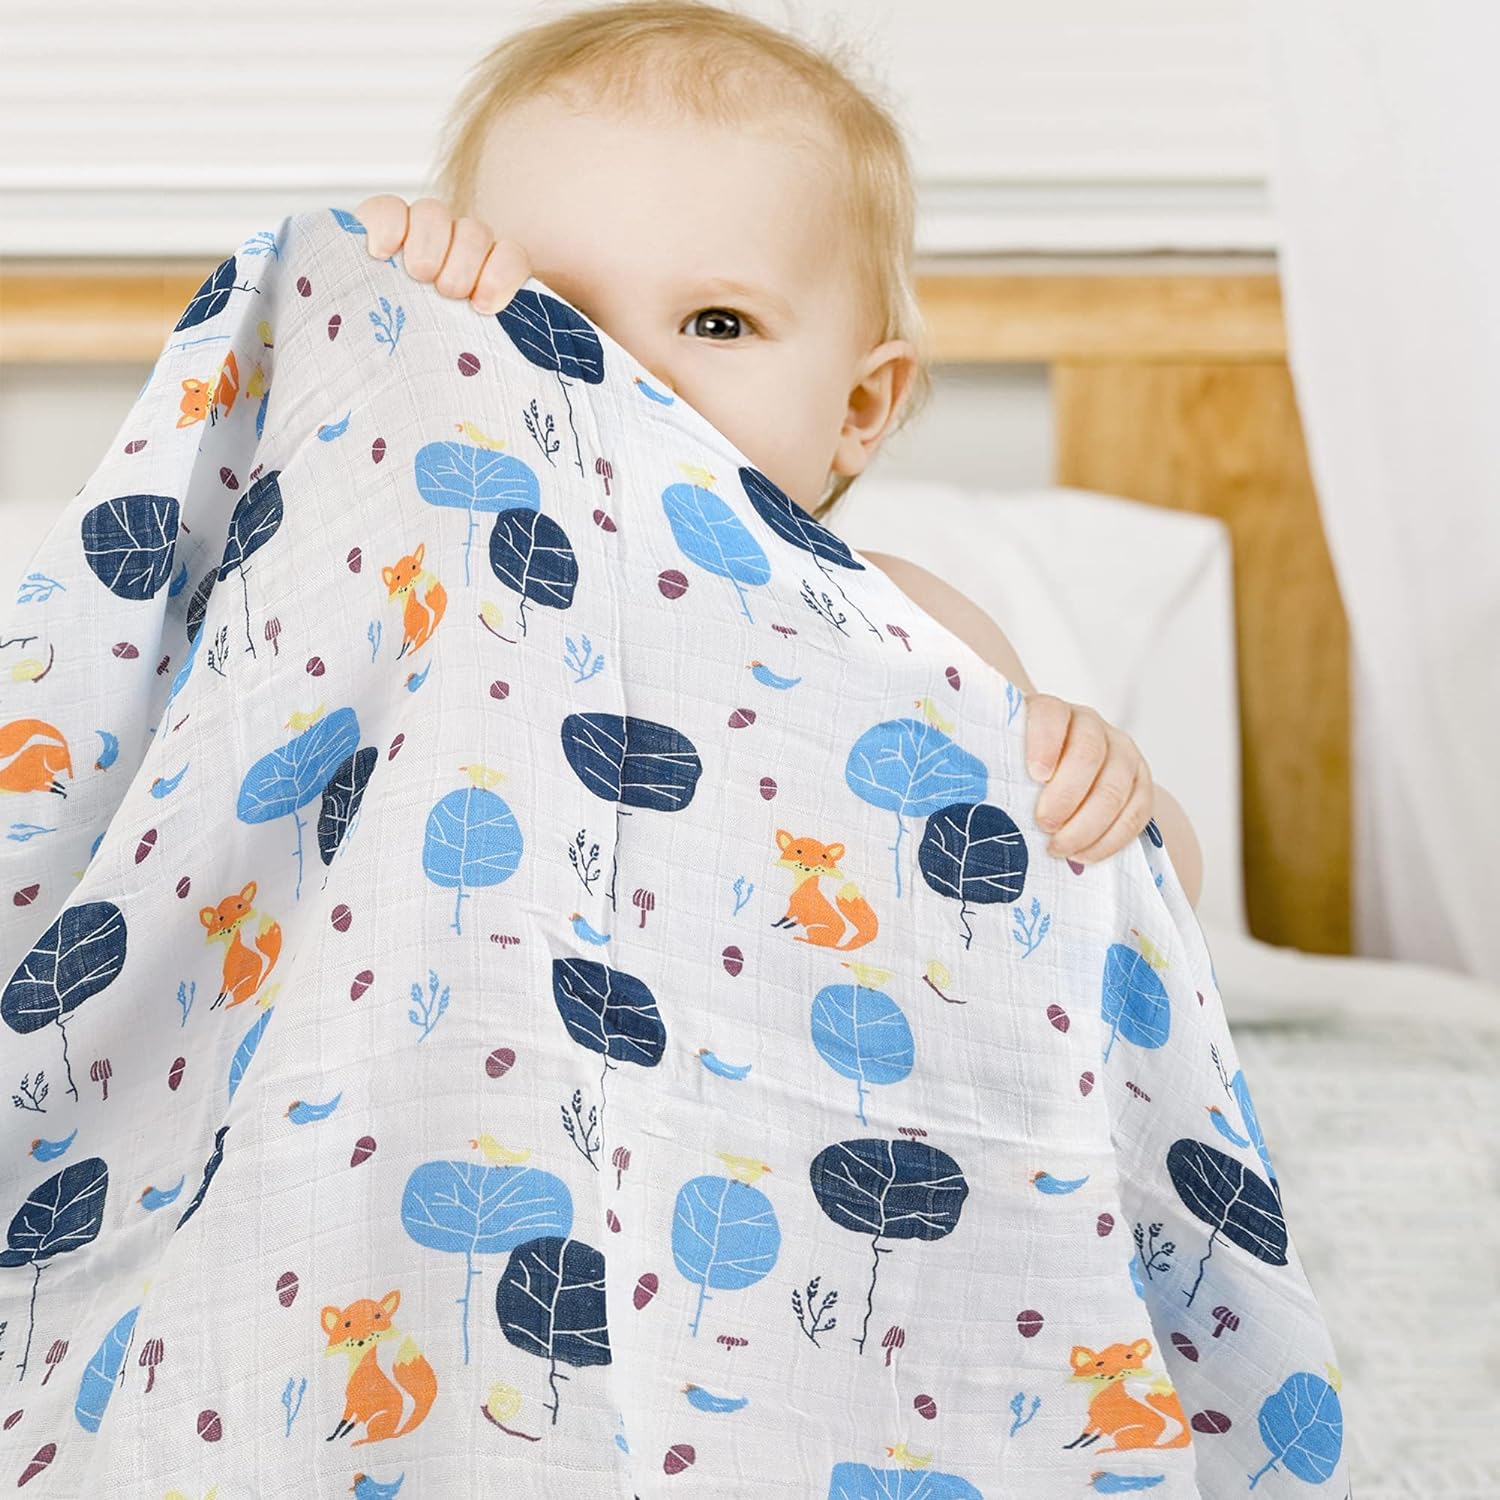 Baby Swaddle Blankets Bamboo Swaddle Blanket Breathable and Skin-Friendly 2 Pack Baby Swaddling Large 47 x 47 inches Wrap for Baby Boys and Girls Infant Receiving Blankets